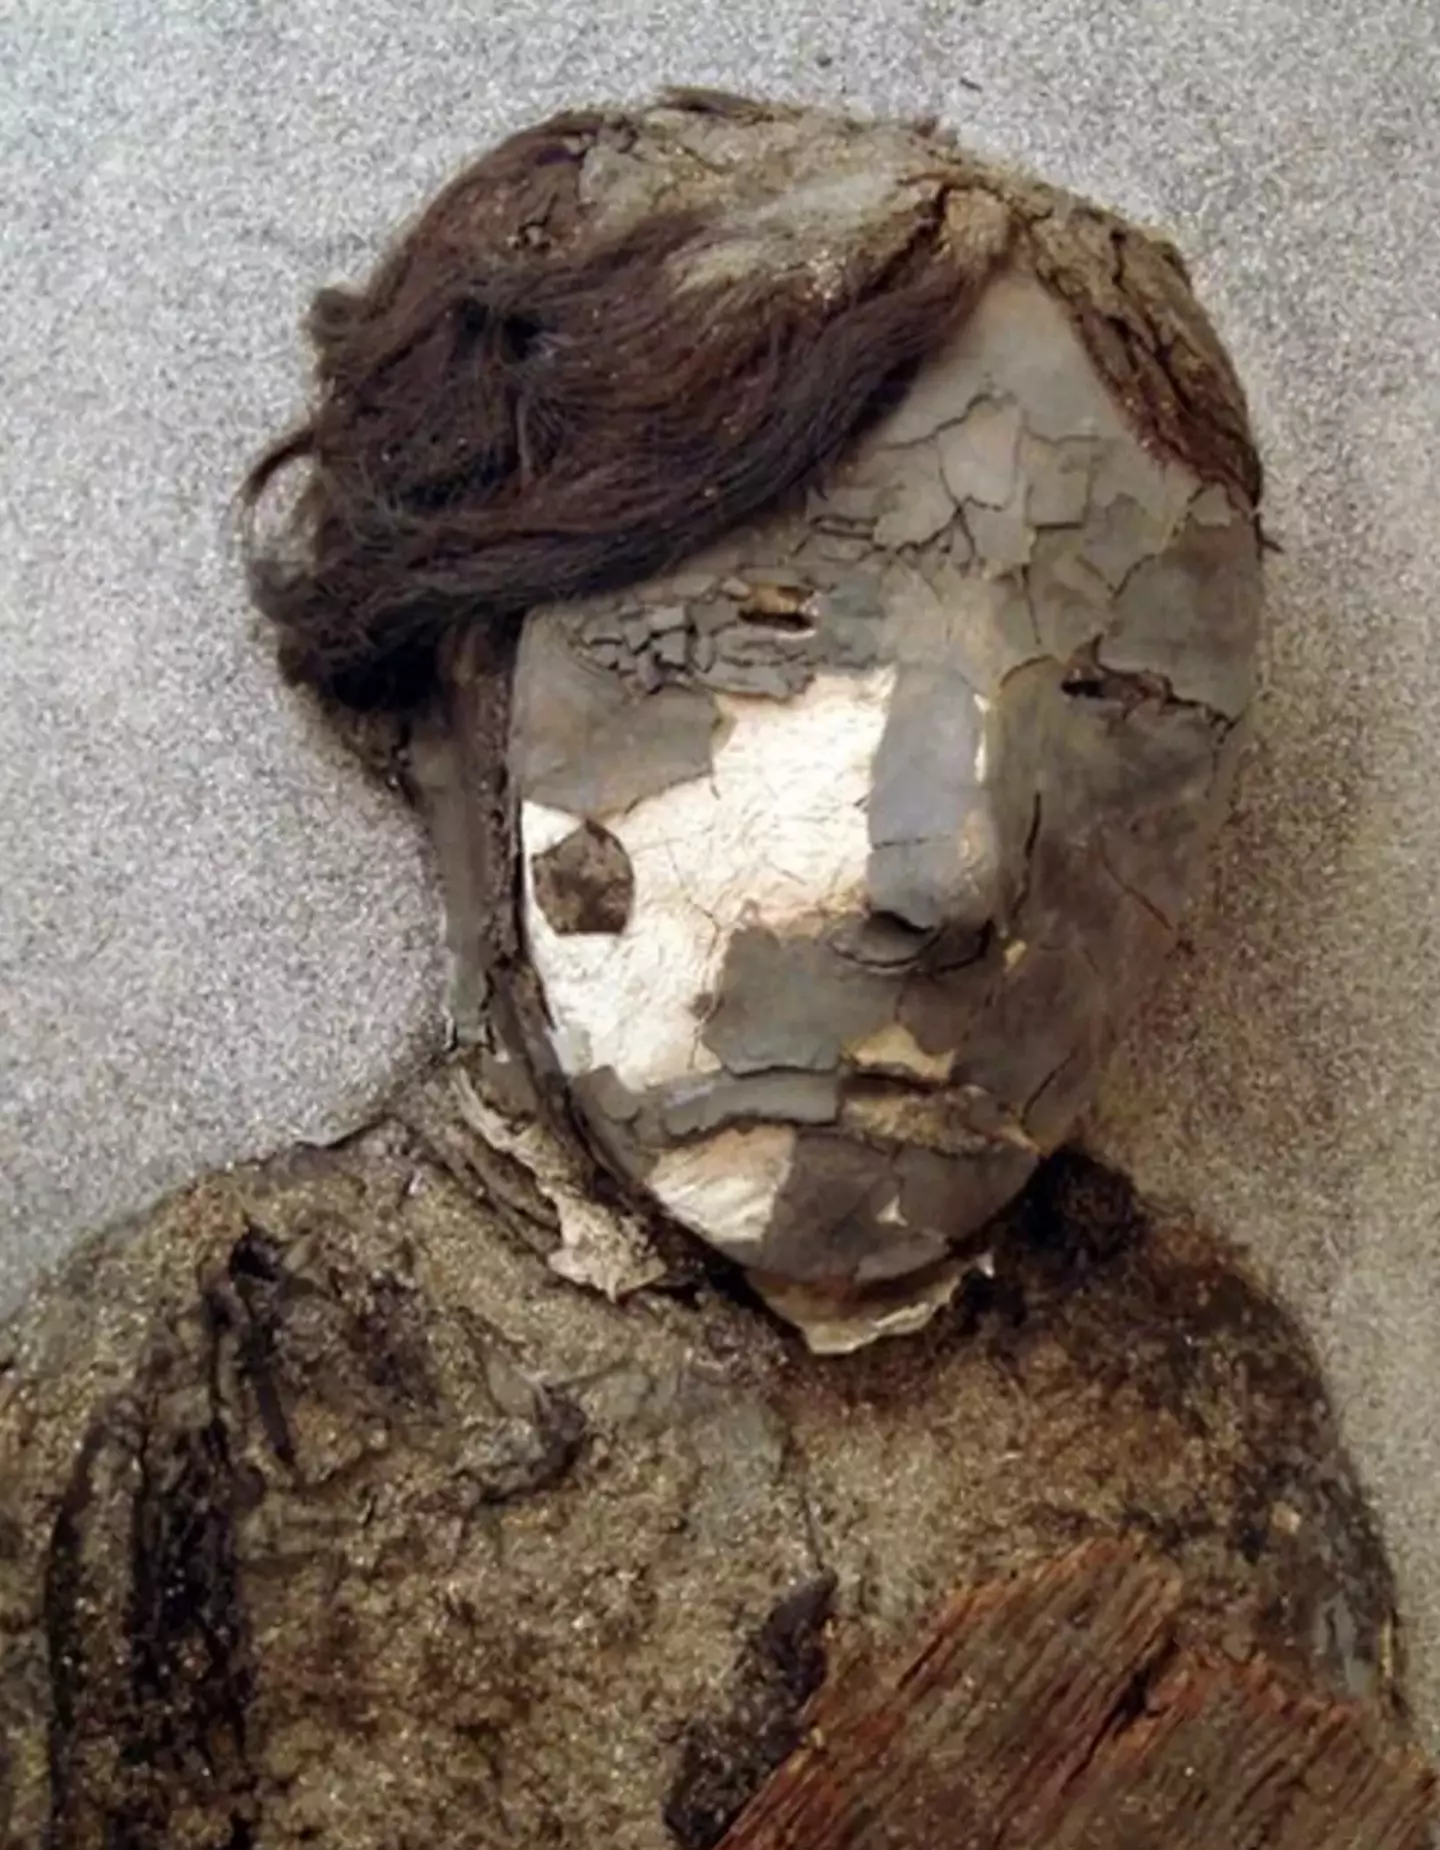 These mummies predate Egyptian mummies by thousands of years.